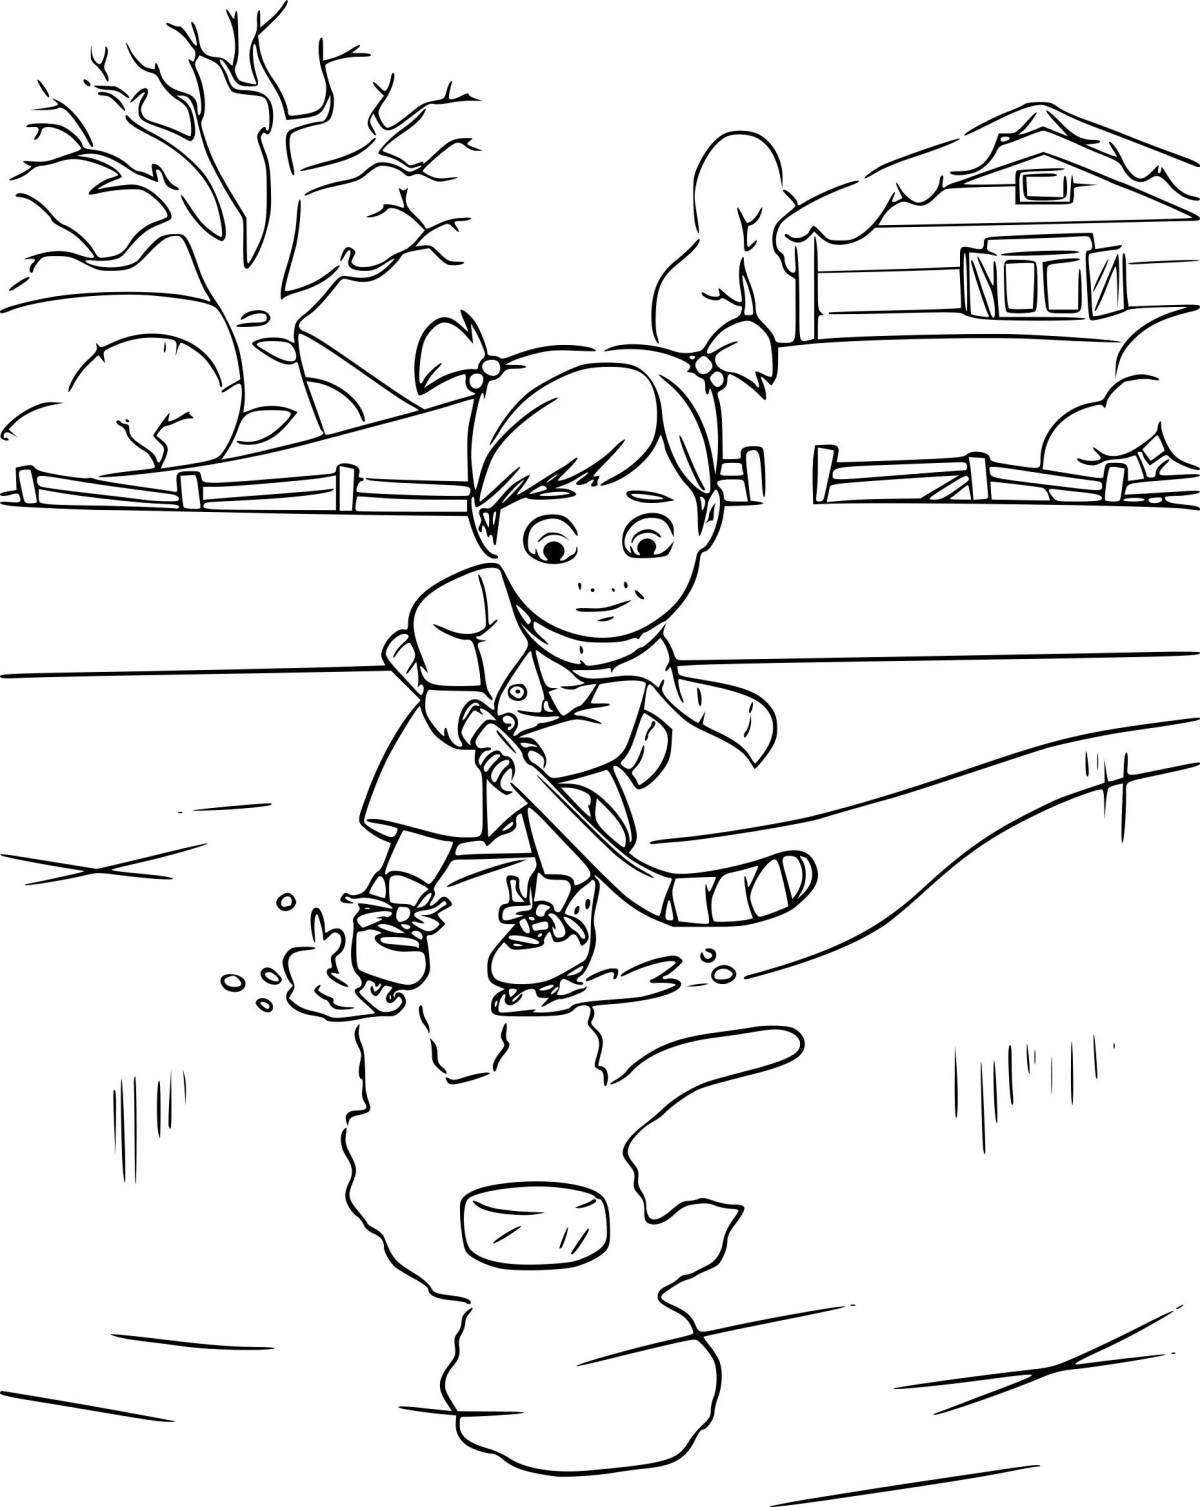 Funny ice safety coloring page